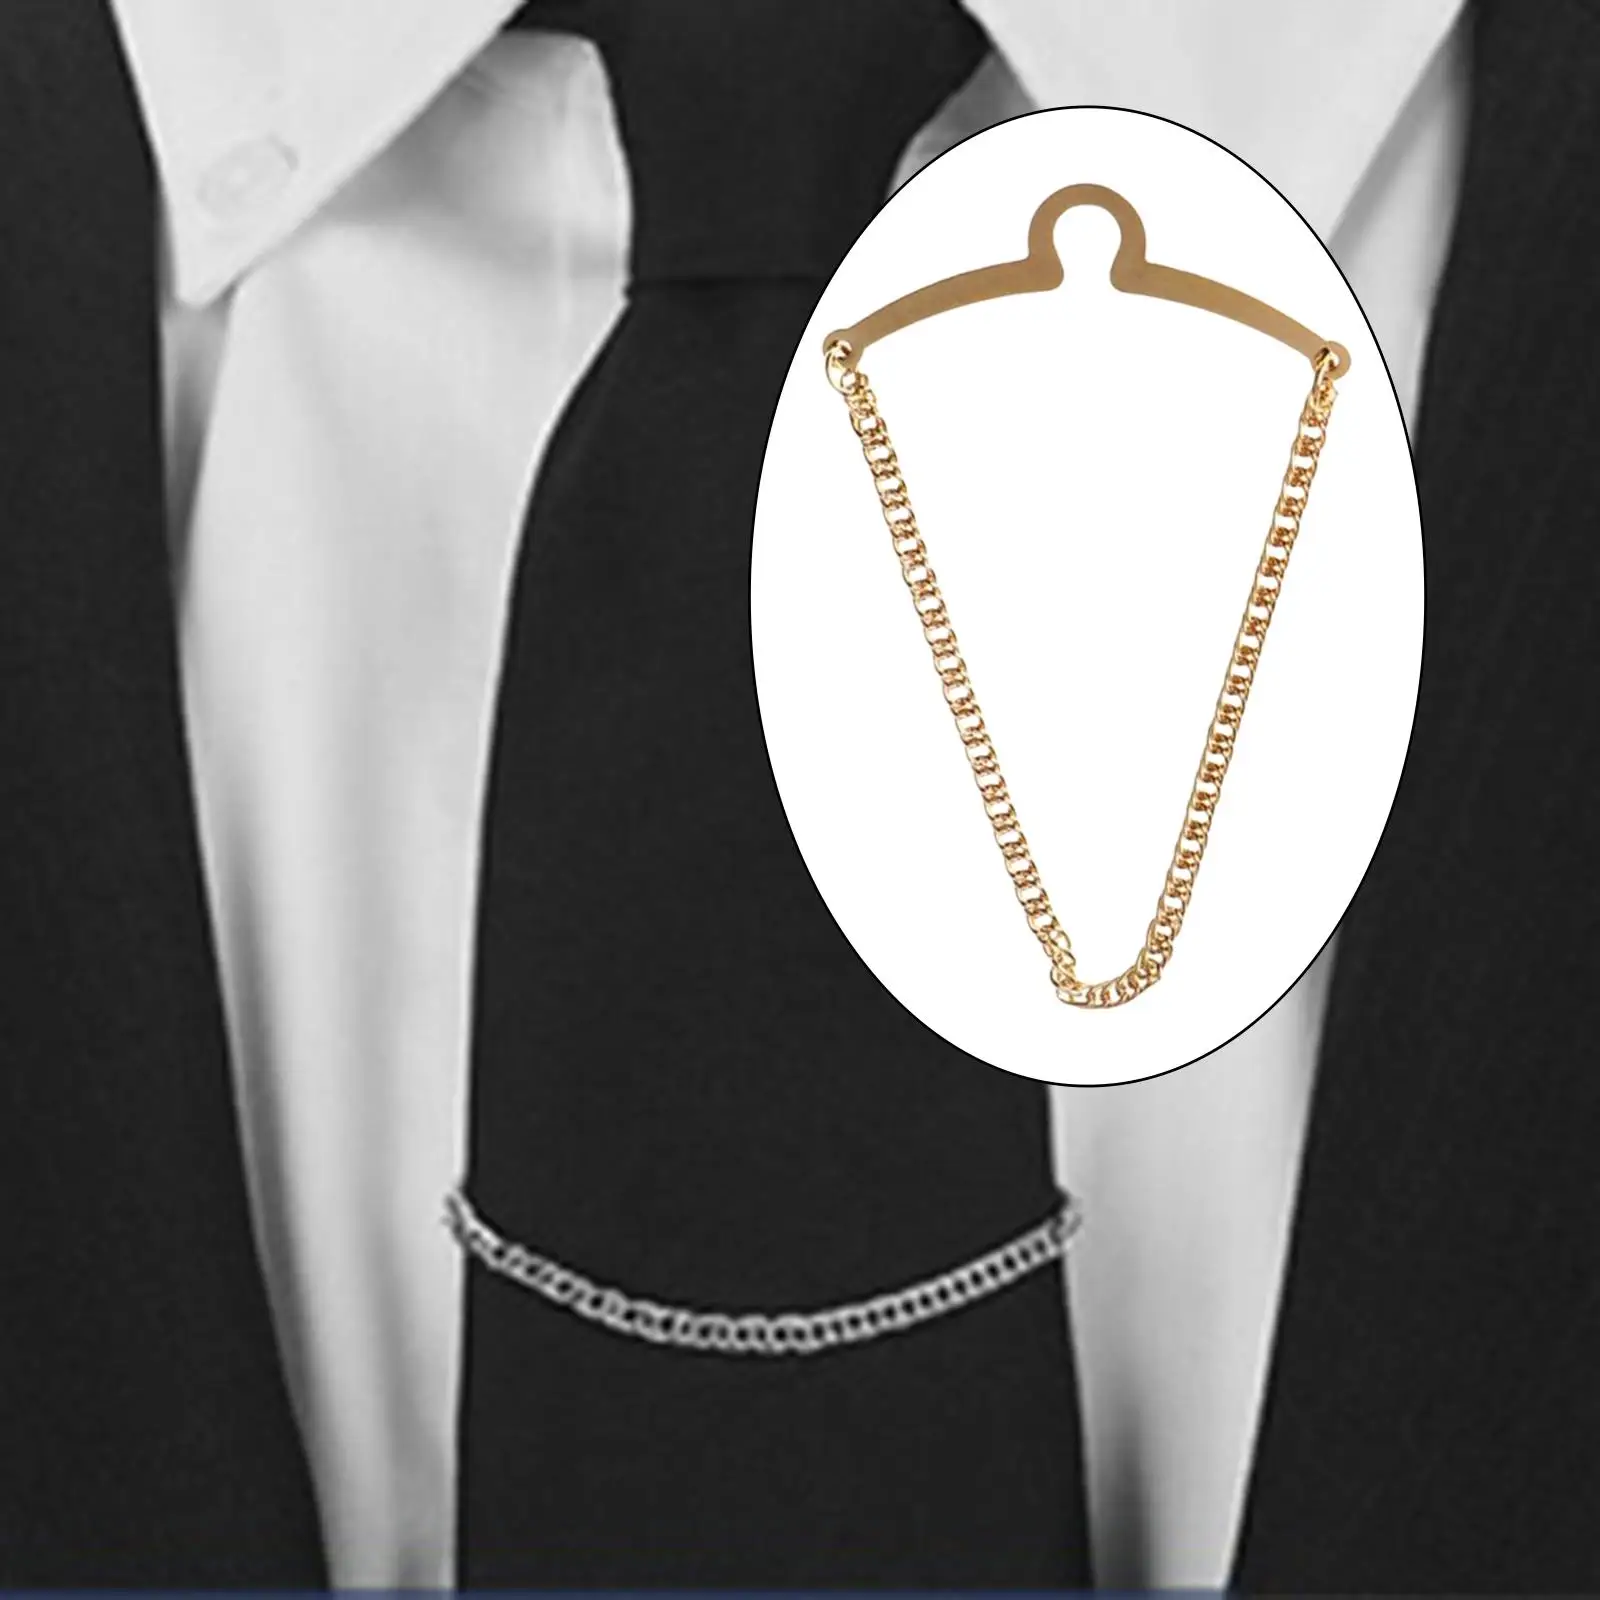 Men`s Tie Chain Button Attachment Brooch Necktie Link Chain Tie Clips for Business Engagement Suit Shirt Jewelry Gold Plated